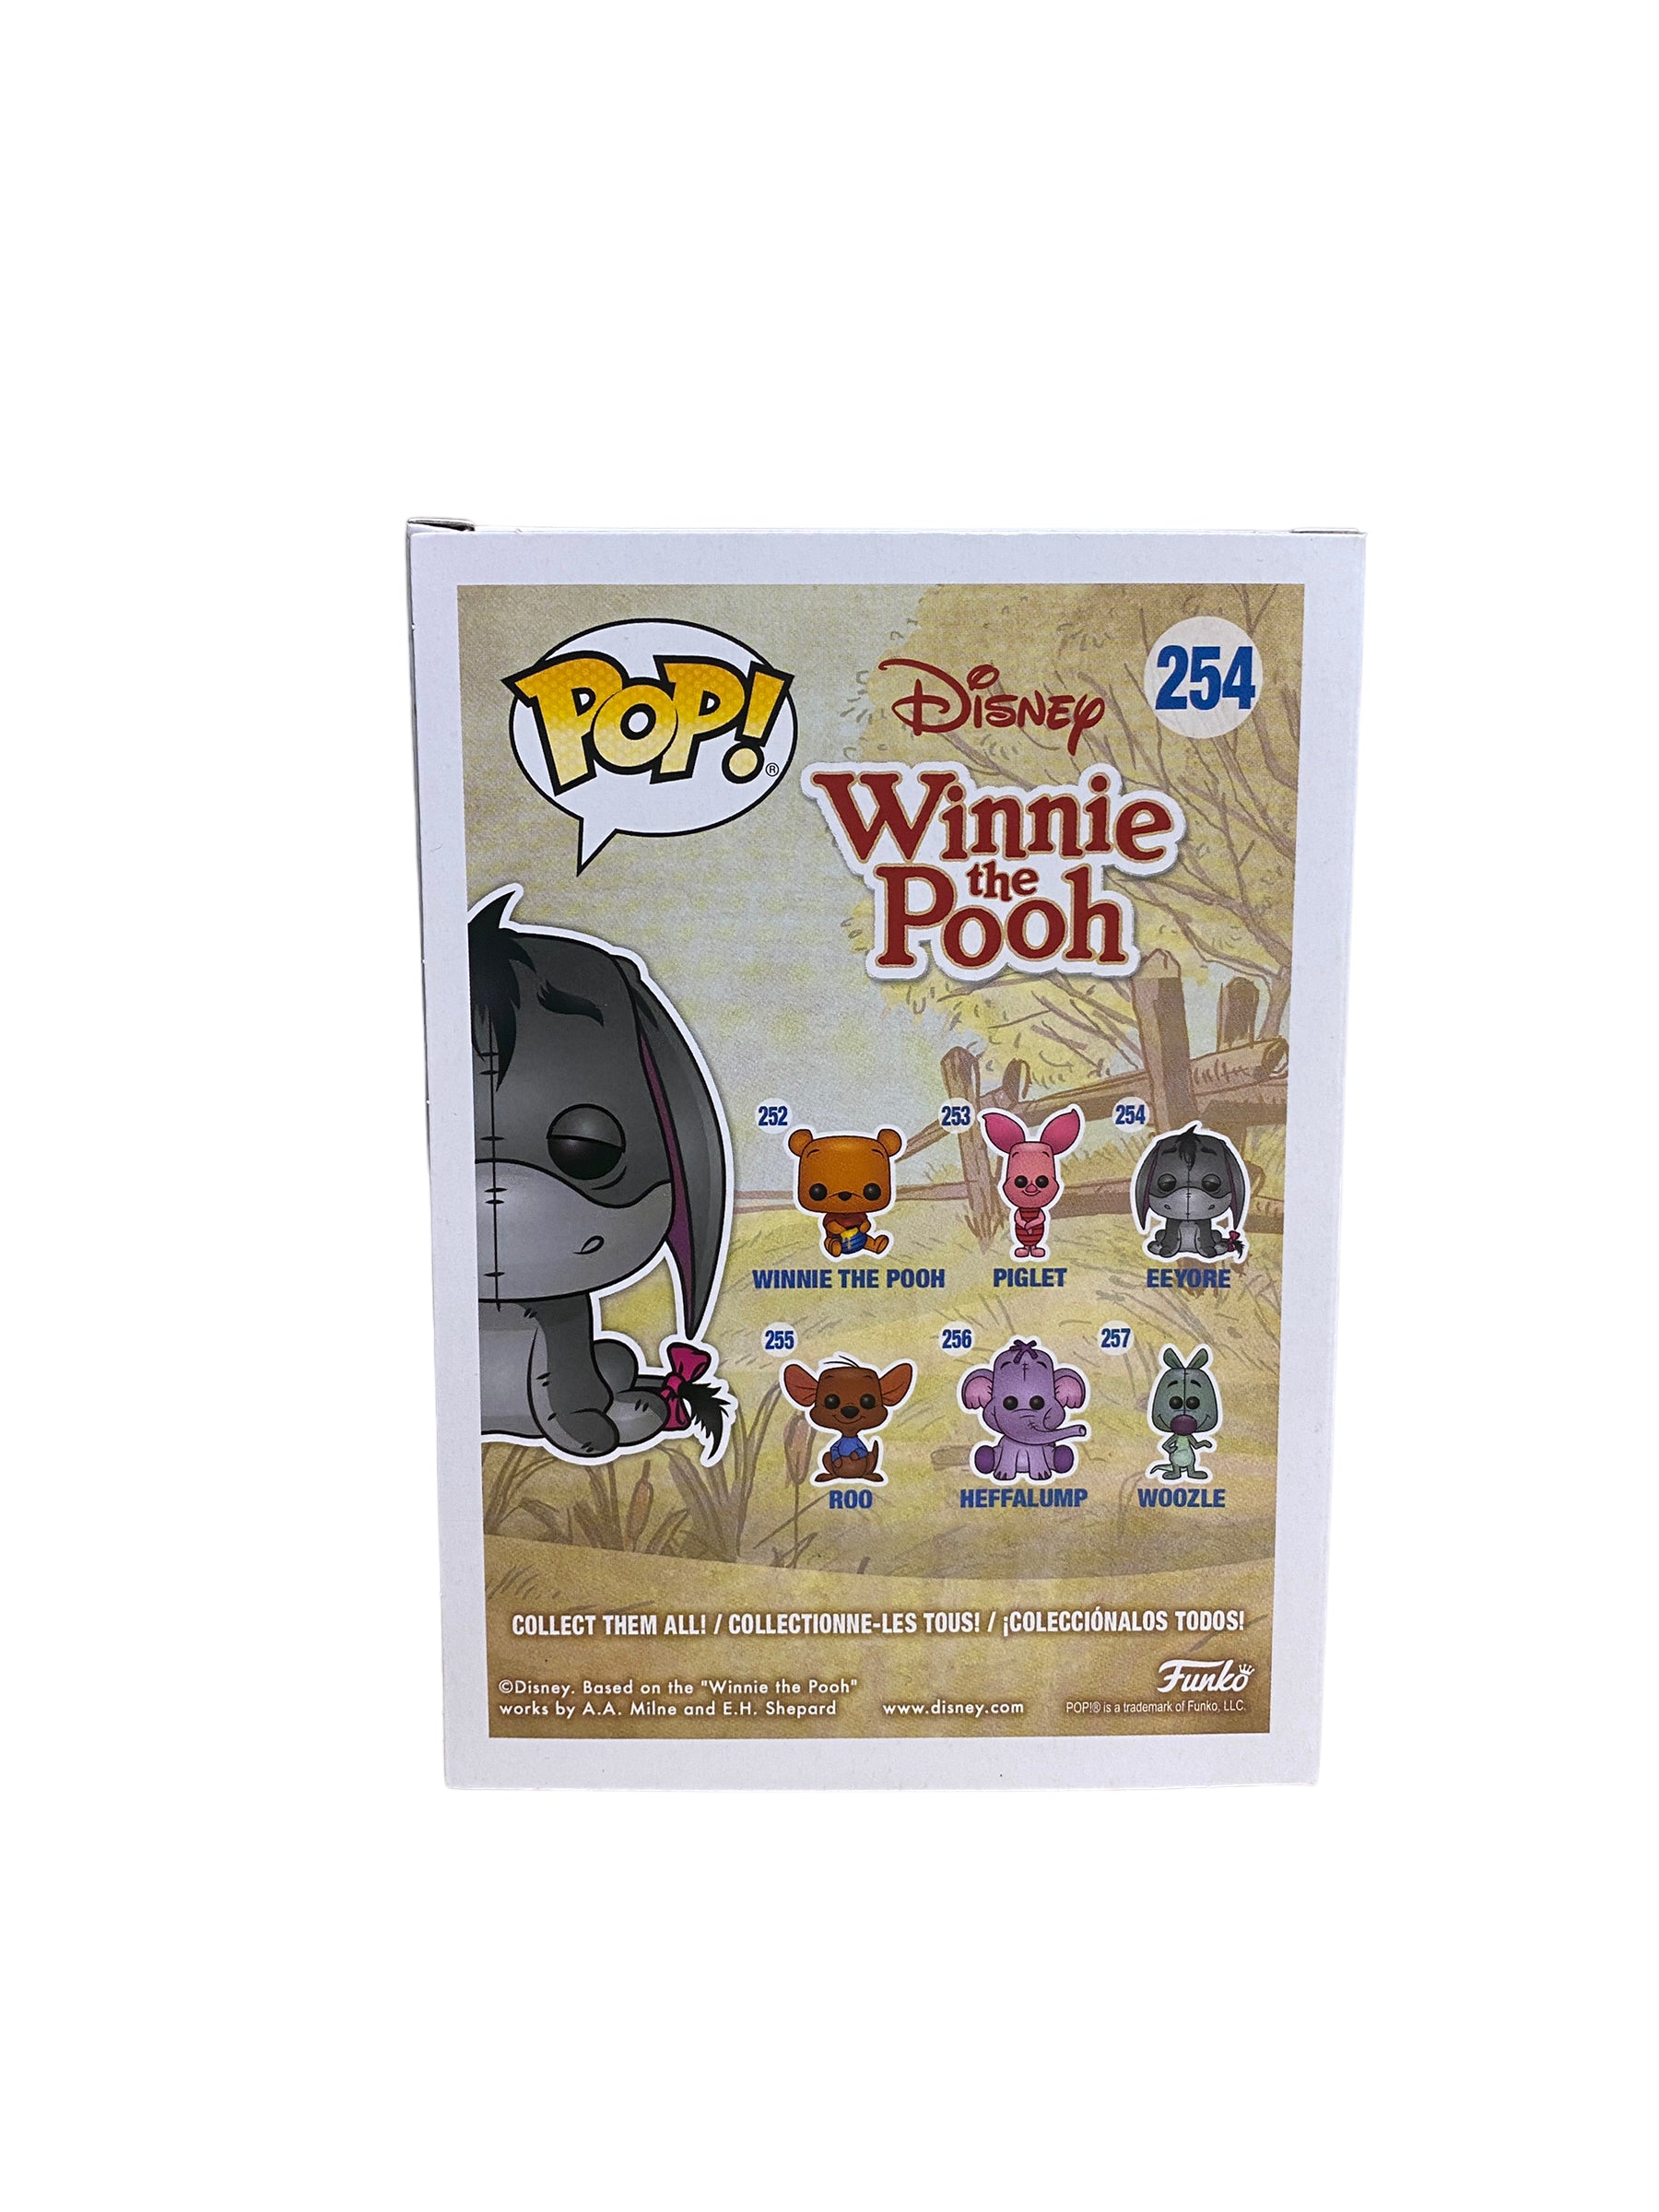 Eeyore #254 (Blue Diamond Chase) Funko Pop! - Winnie the Pooh - Hot Topic Exclusive - Condition 8.75/10